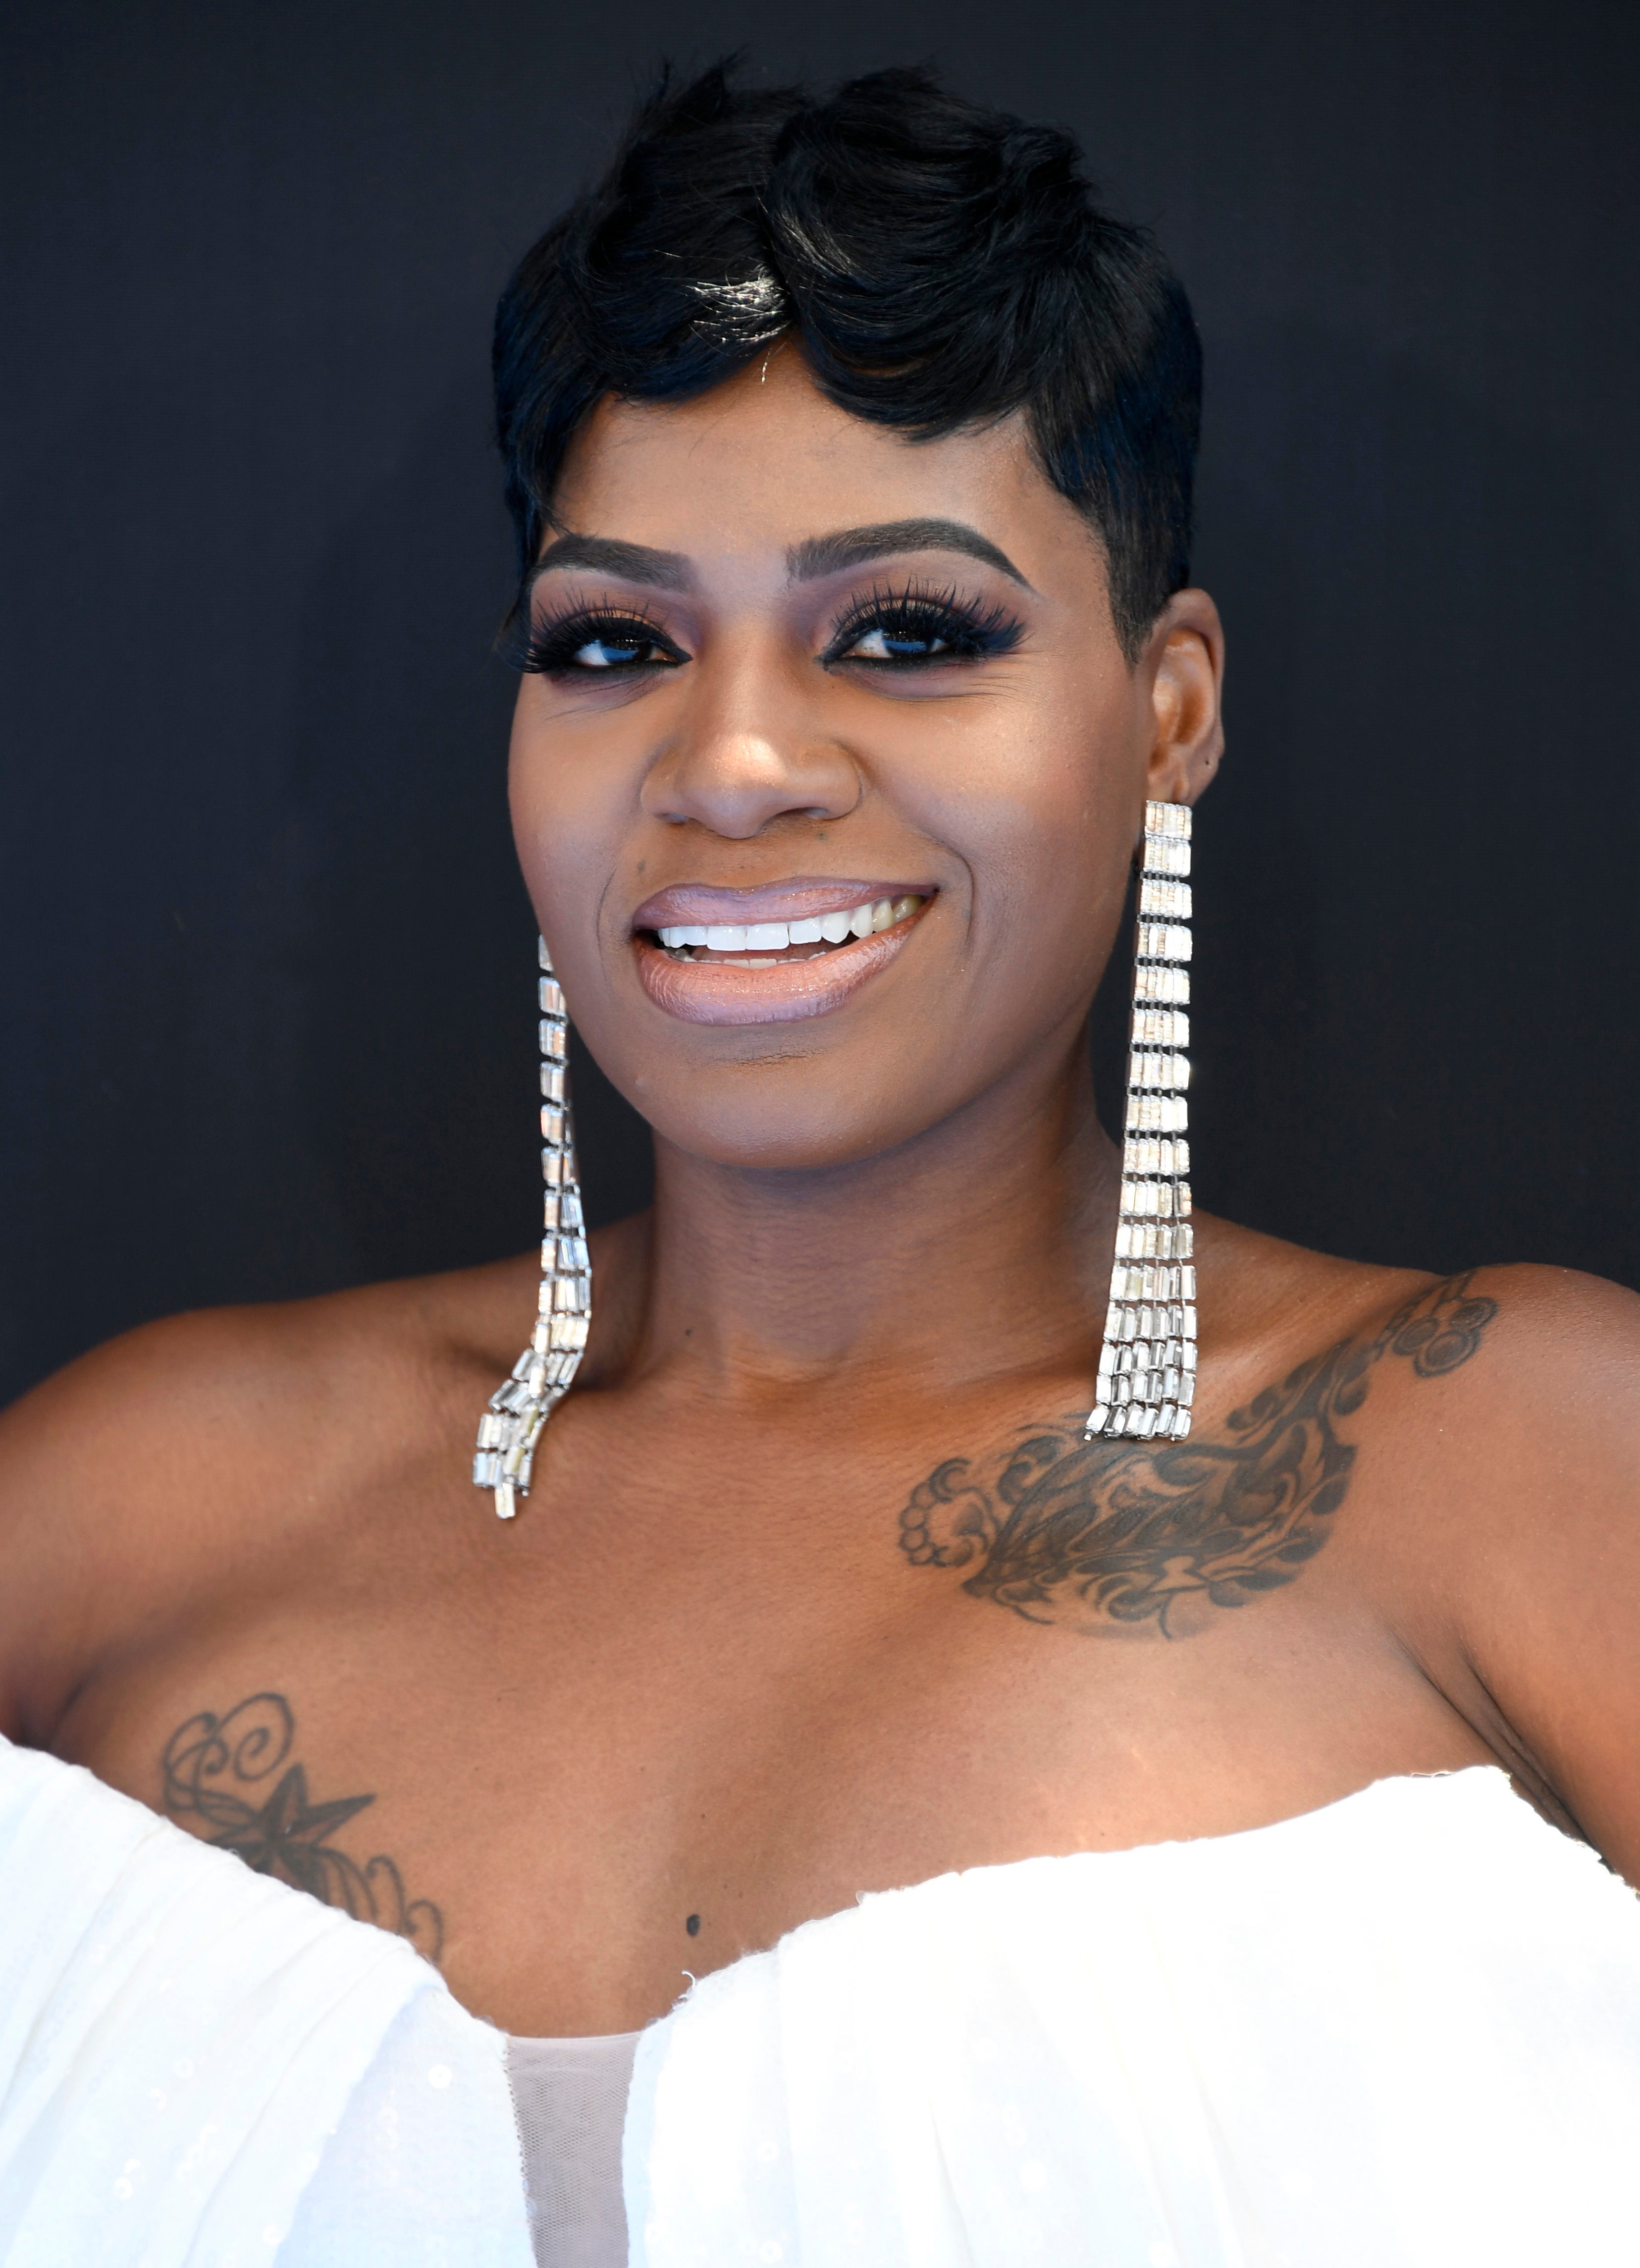 Red Carpet Beauty From The 2019 BET Awards